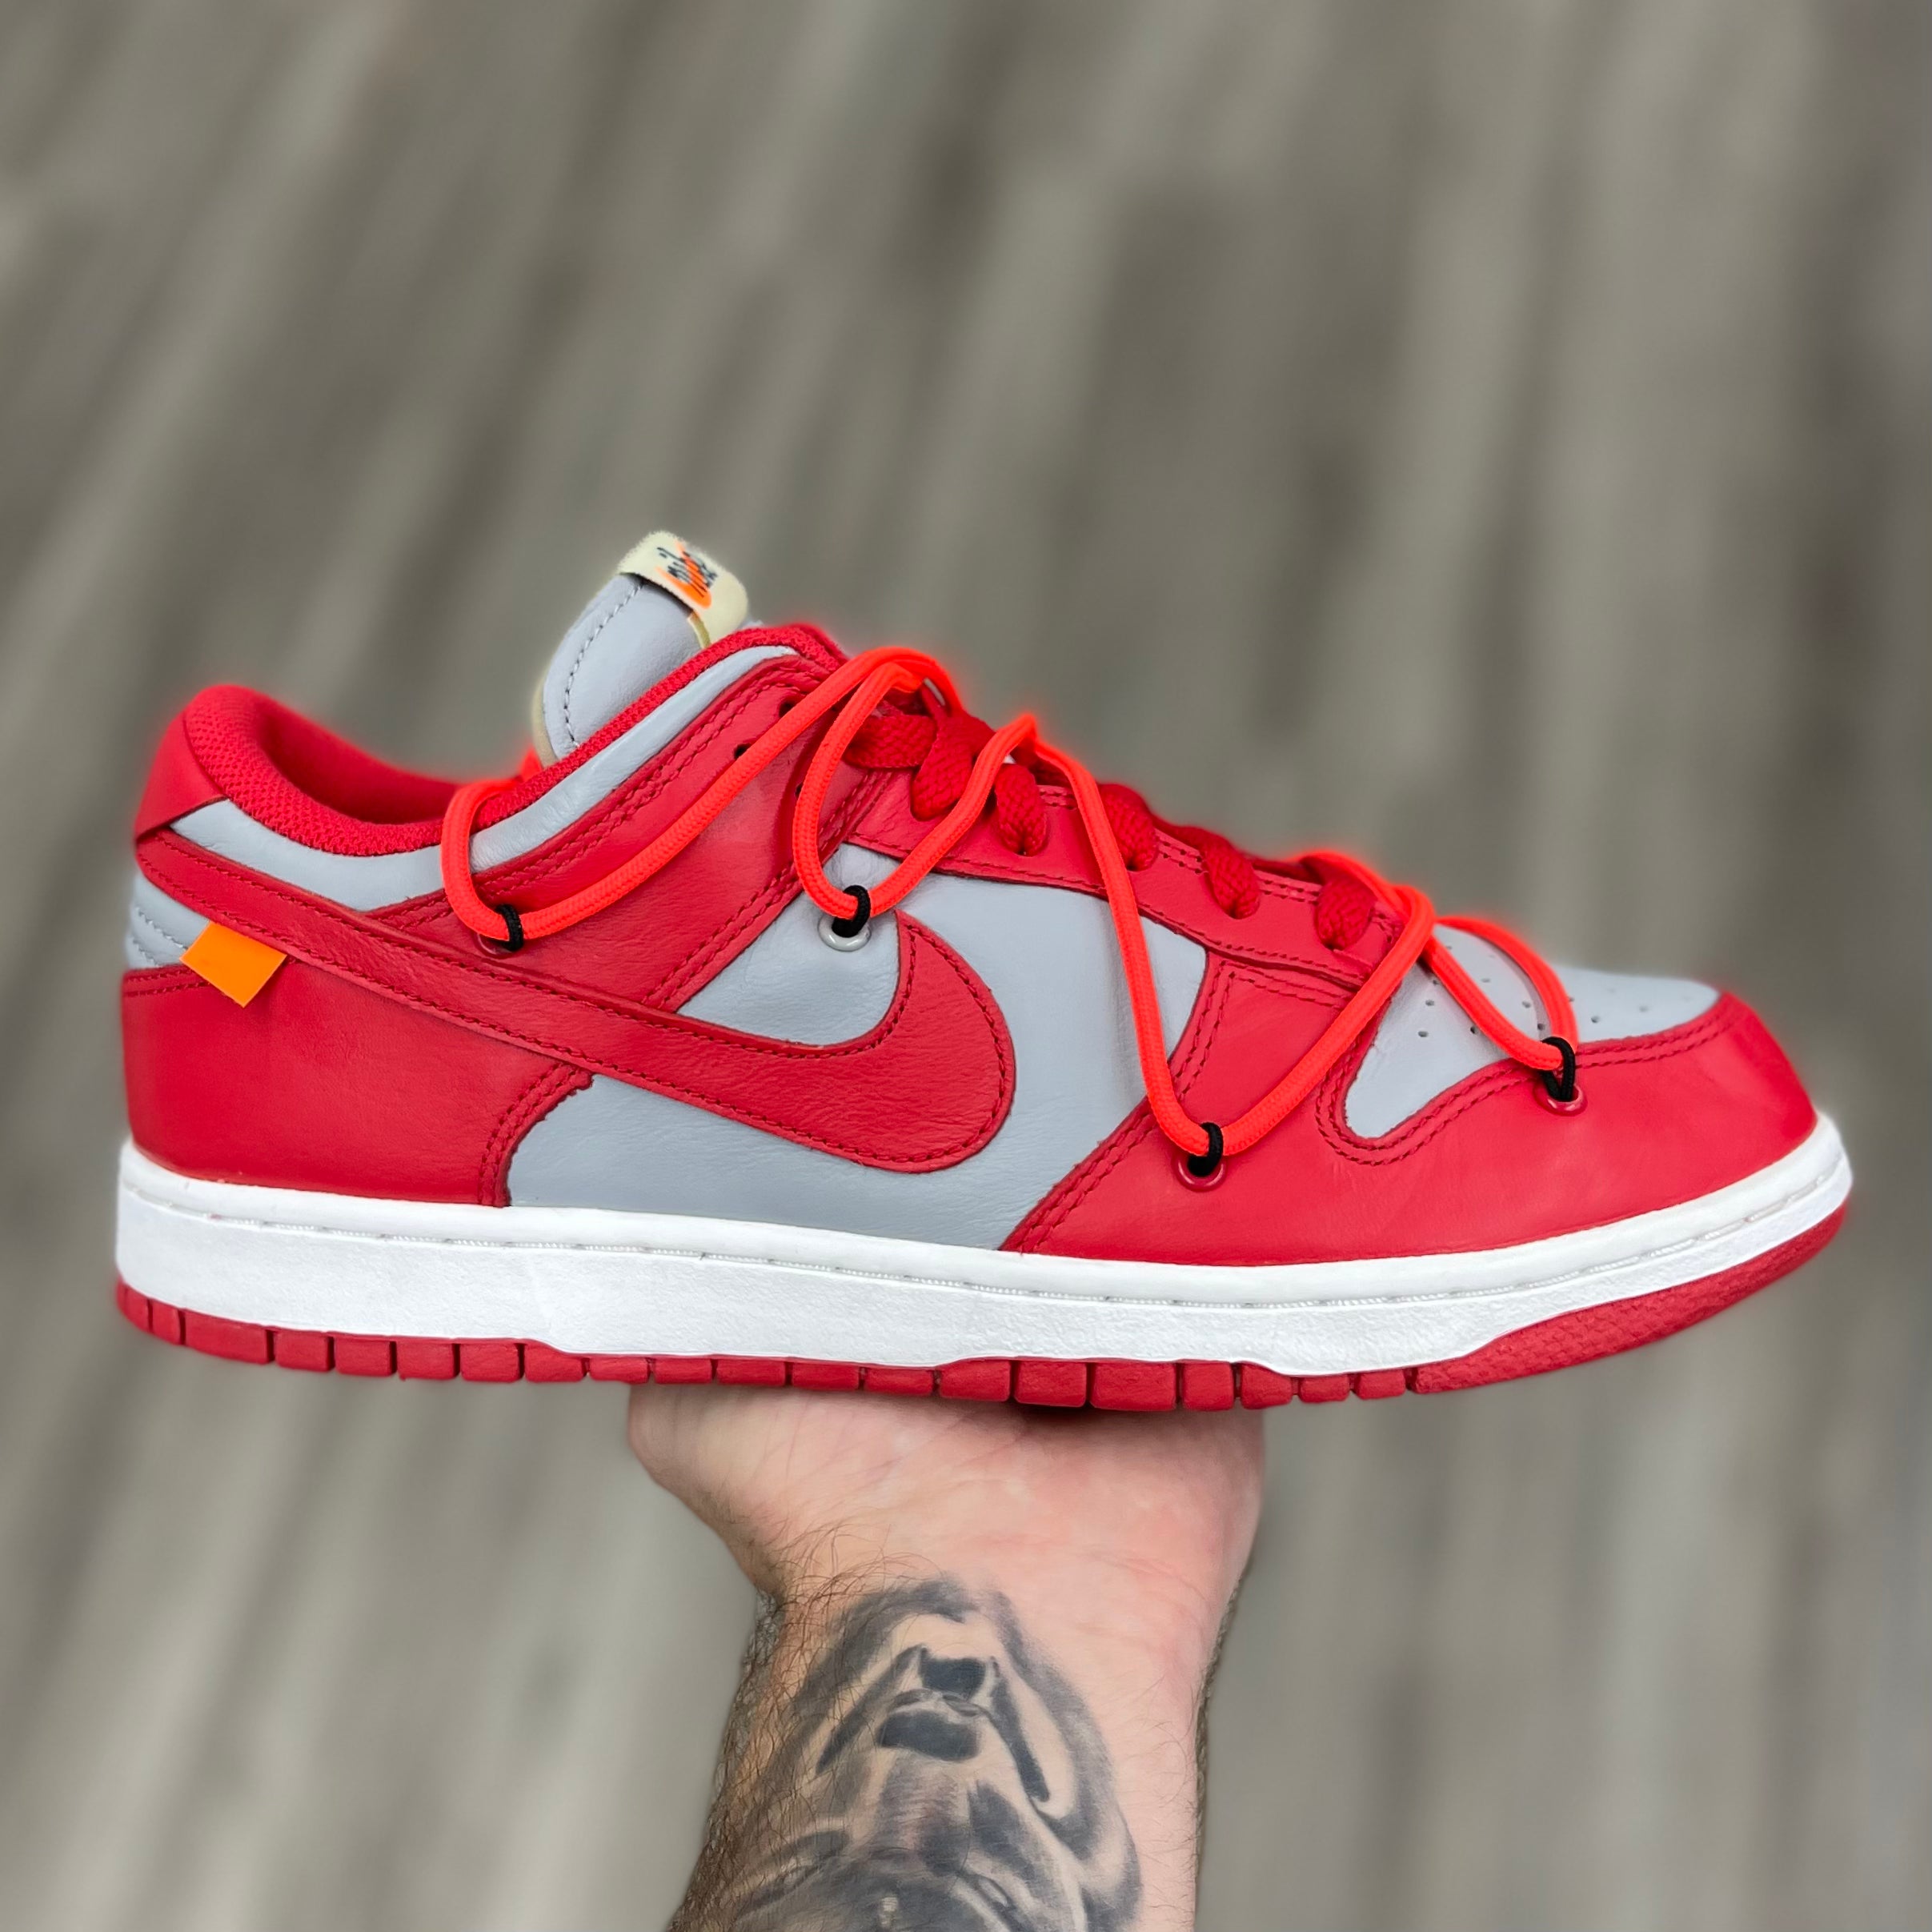 Nike Dunk Low “Off White University Red”